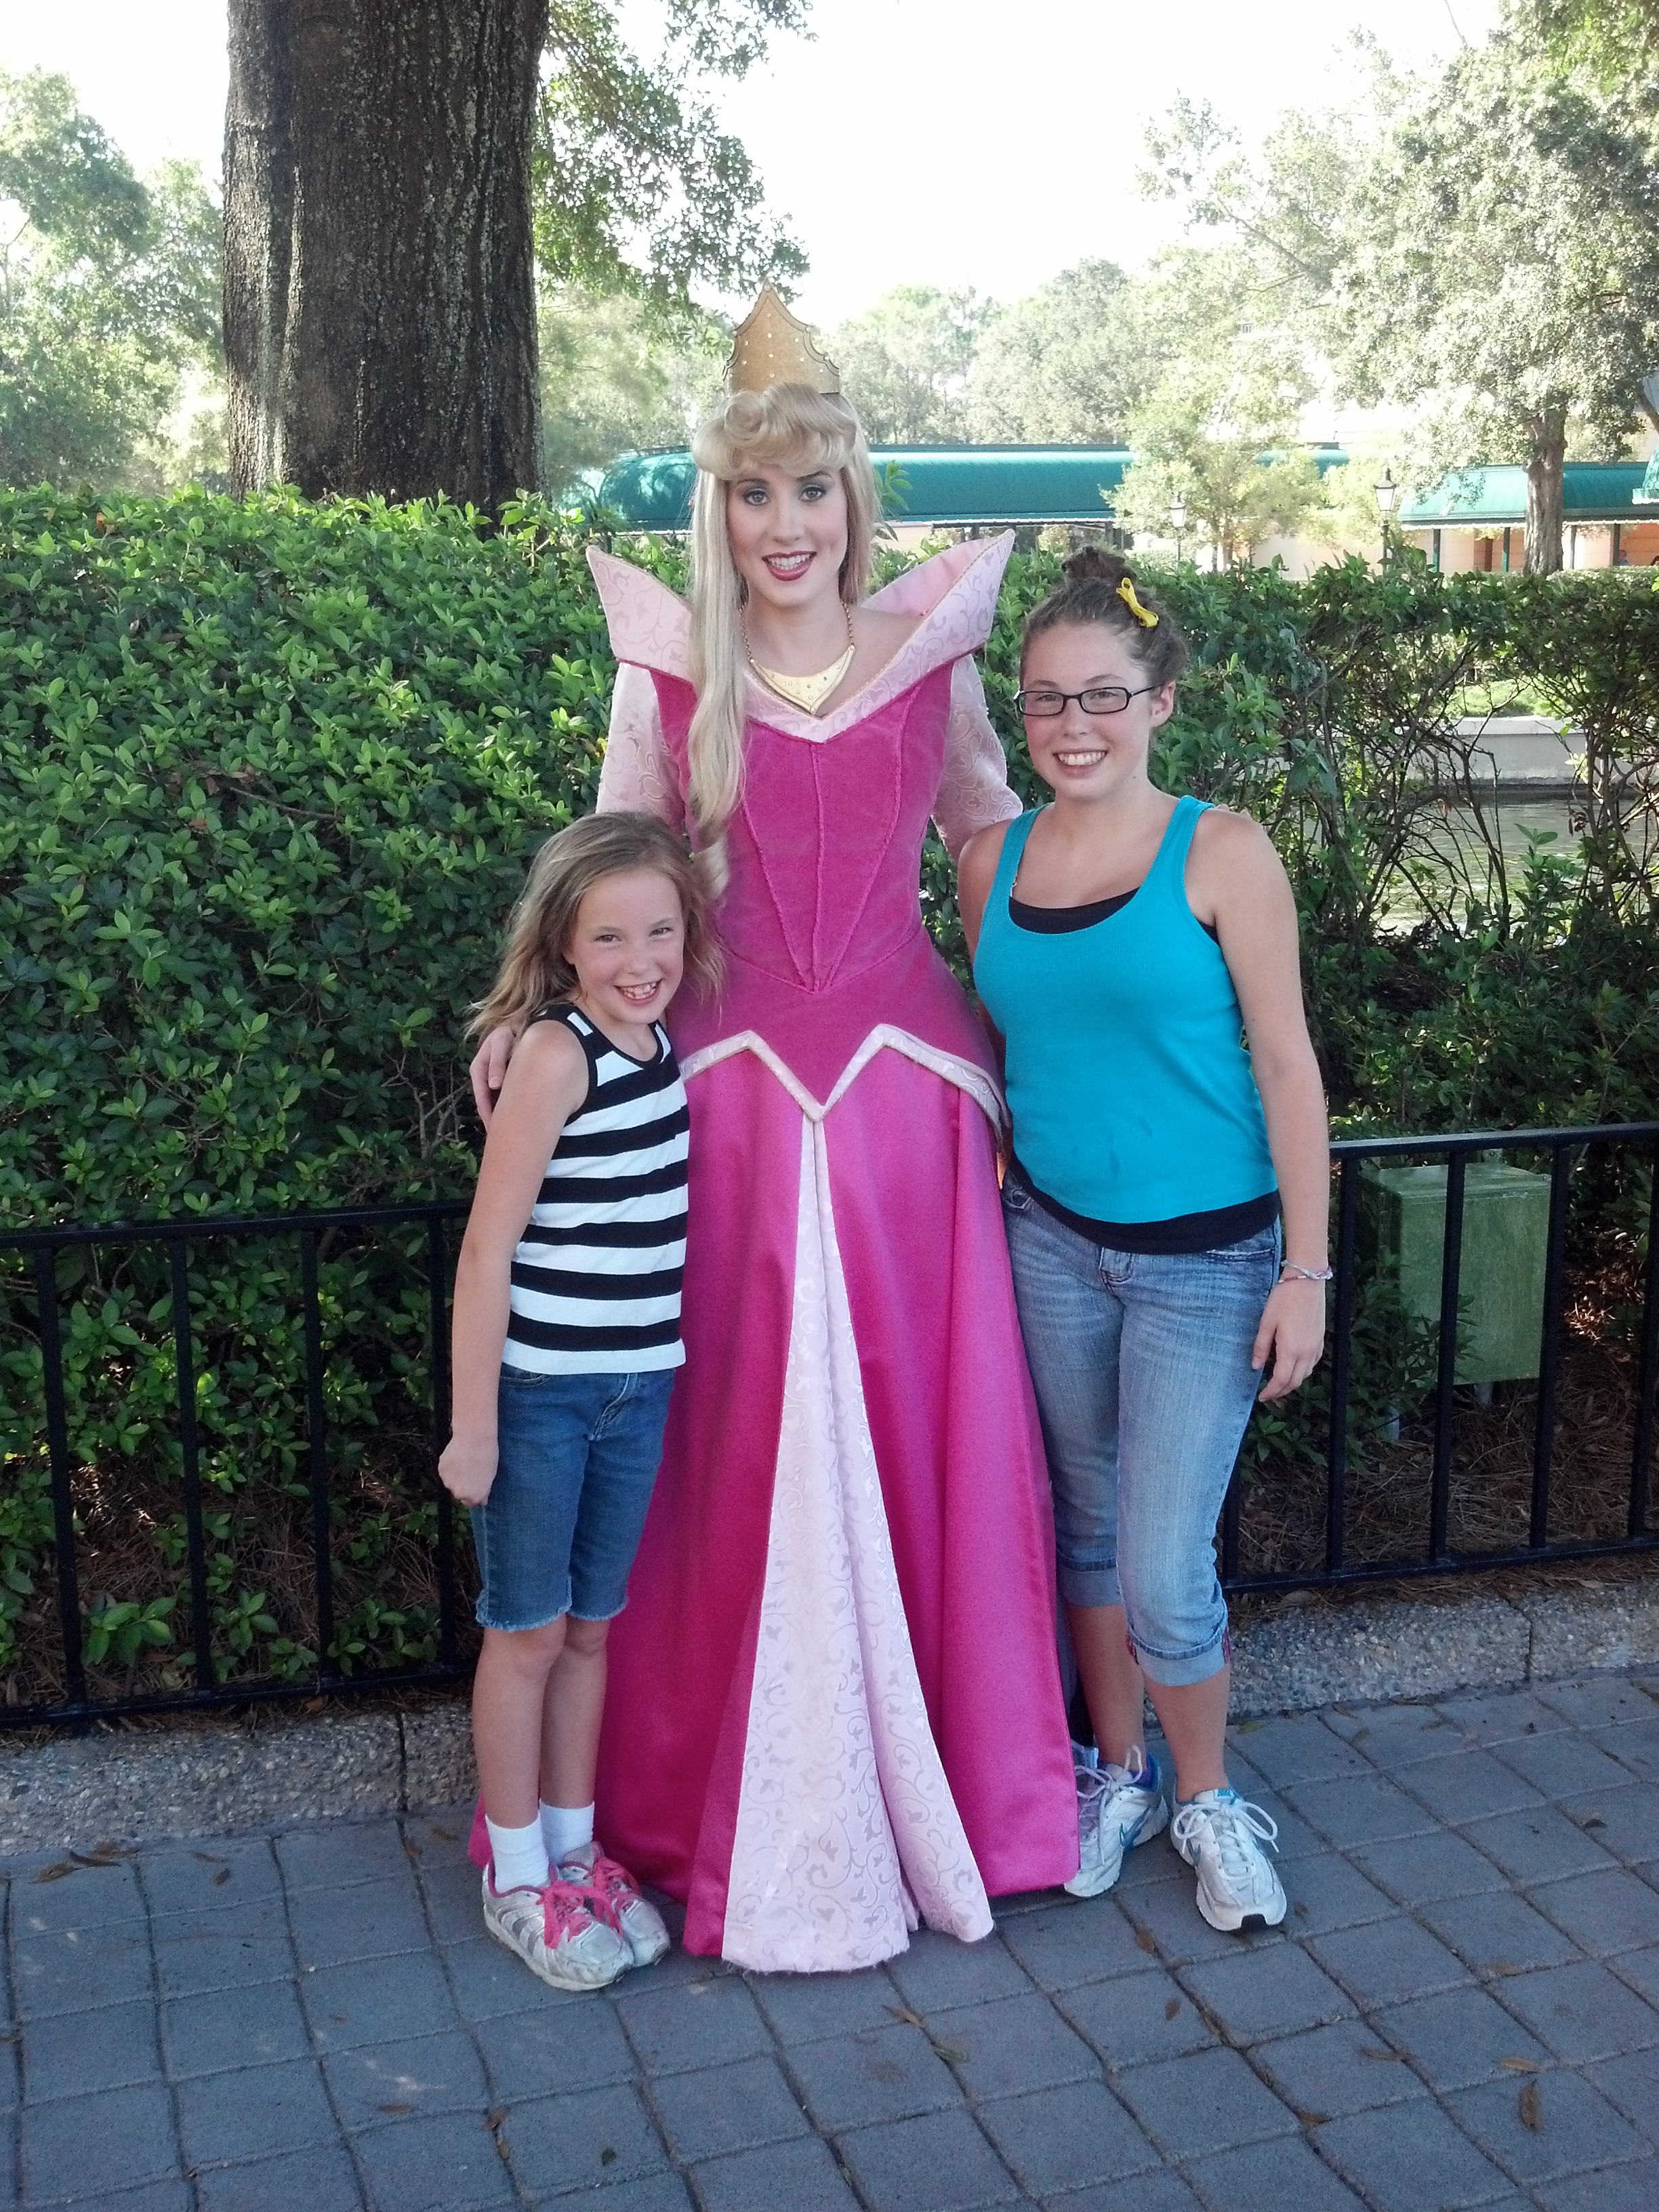 Aurora (Sleeping Beauty)  in France at Epcot 2012